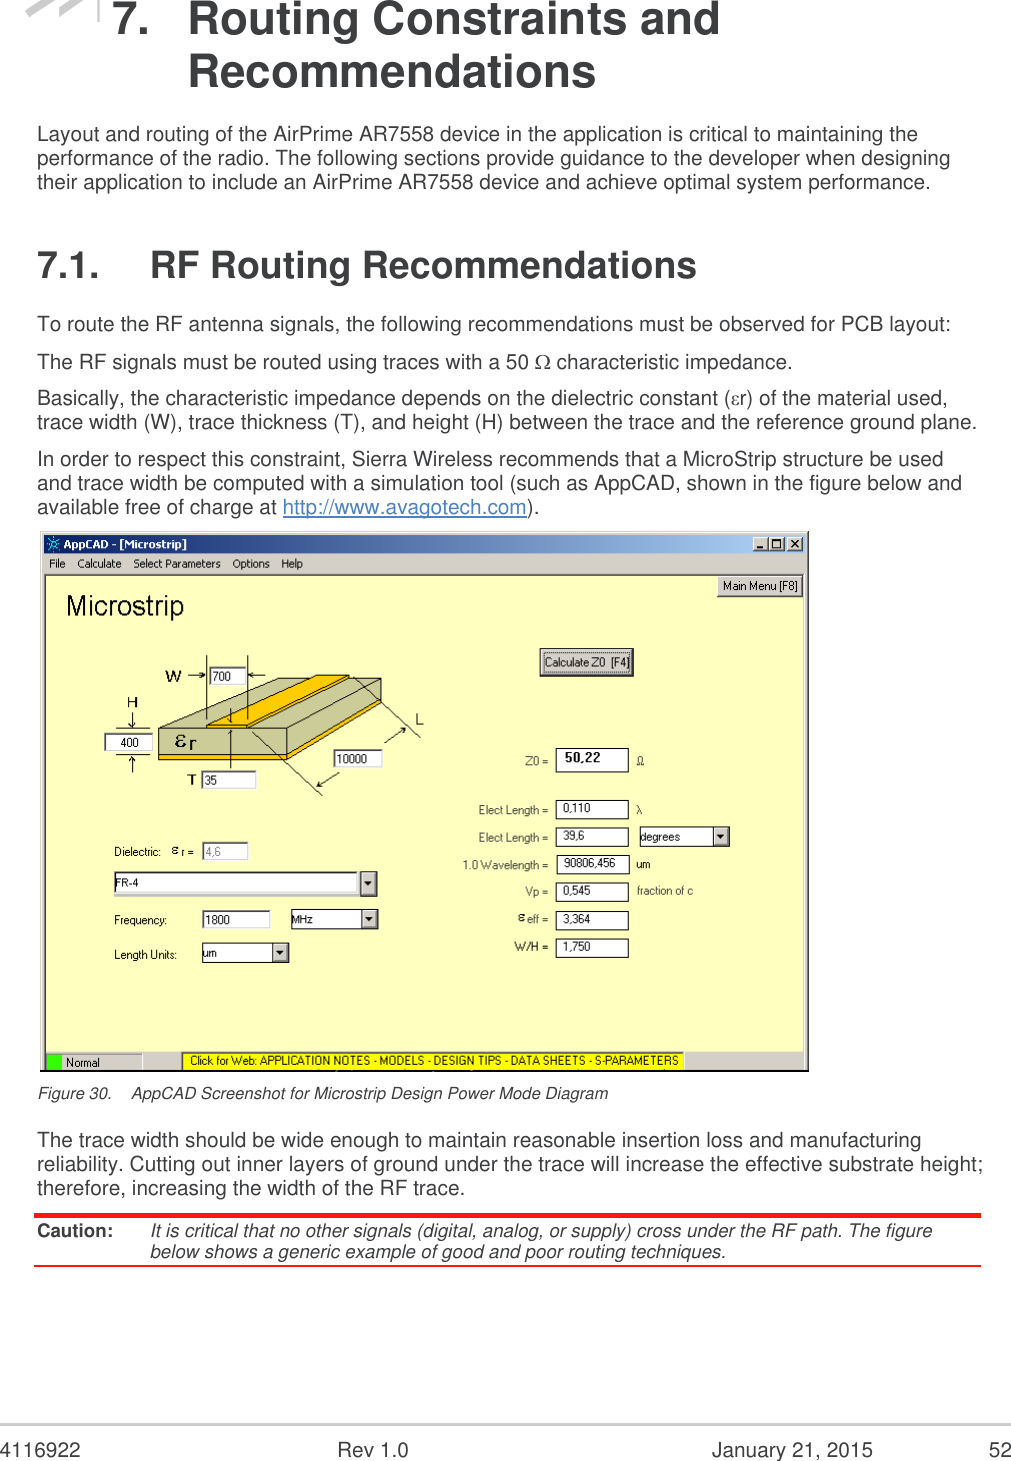  4116922  Rev 1.0  January 21, 2015  52 7.  Routing Constraints and Recommendations Layout and routing of the AirPrime AR7558 device in the application is critical to maintaining the performance of the radio. The following sections provide guidance to the developer when designing their application to include an AirPrime AR7558 device and achieve optimal system performance. 7.1.  RF Routing Recommendations To route the RF antenna signals, the following recommendations must be observed for PCB layout: The RF signals must be routed using traces with a 50  characteristic impedance. Basically, the characteristic impedance depends on the dielectric constant (εr) of the material used, trace width (W), trace thickness (T), and height (H) between the trace and the reference ground plane. In order to respect this constraint, Sierra Wireless recommends that a MicroStrip structure be used and trace width be computed with a simulation tool (such as AppCAD, shown in the figure below and available free of charge at http://www.avagotech.com).  Figure 30.  AppCAD Screenshot for Microstrip Design Power Mode Diagram The trace width should be wide enough to maintain reasonable insertion loss and manufacturing reliability. Cutting out inner layers of ground under the trace will increase the effective substrate height; therefore, increasing the width of the RF trace. Caution:  It is critical that no other signals (digital, analog, or supply) cross under the RF path. The figure below shows a generic example of good and poor routing techniques. 